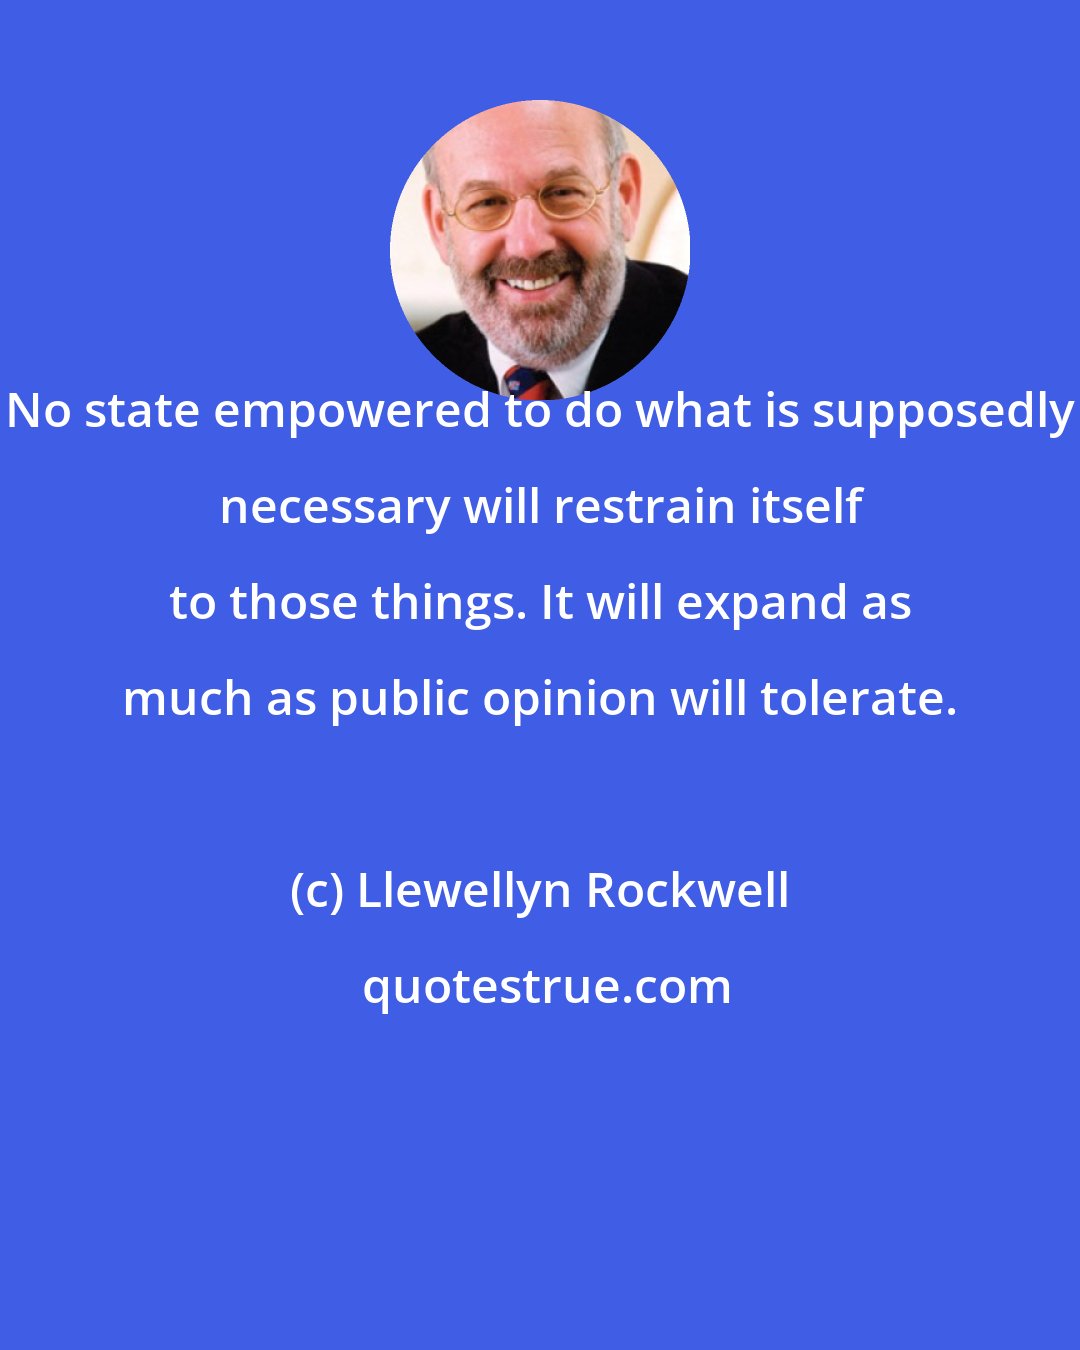 Llewellyn Rockwell: No state empowered to do what is supposedly necessary will restrain itself to those things. It will expand as much as public opinion will tolerate.